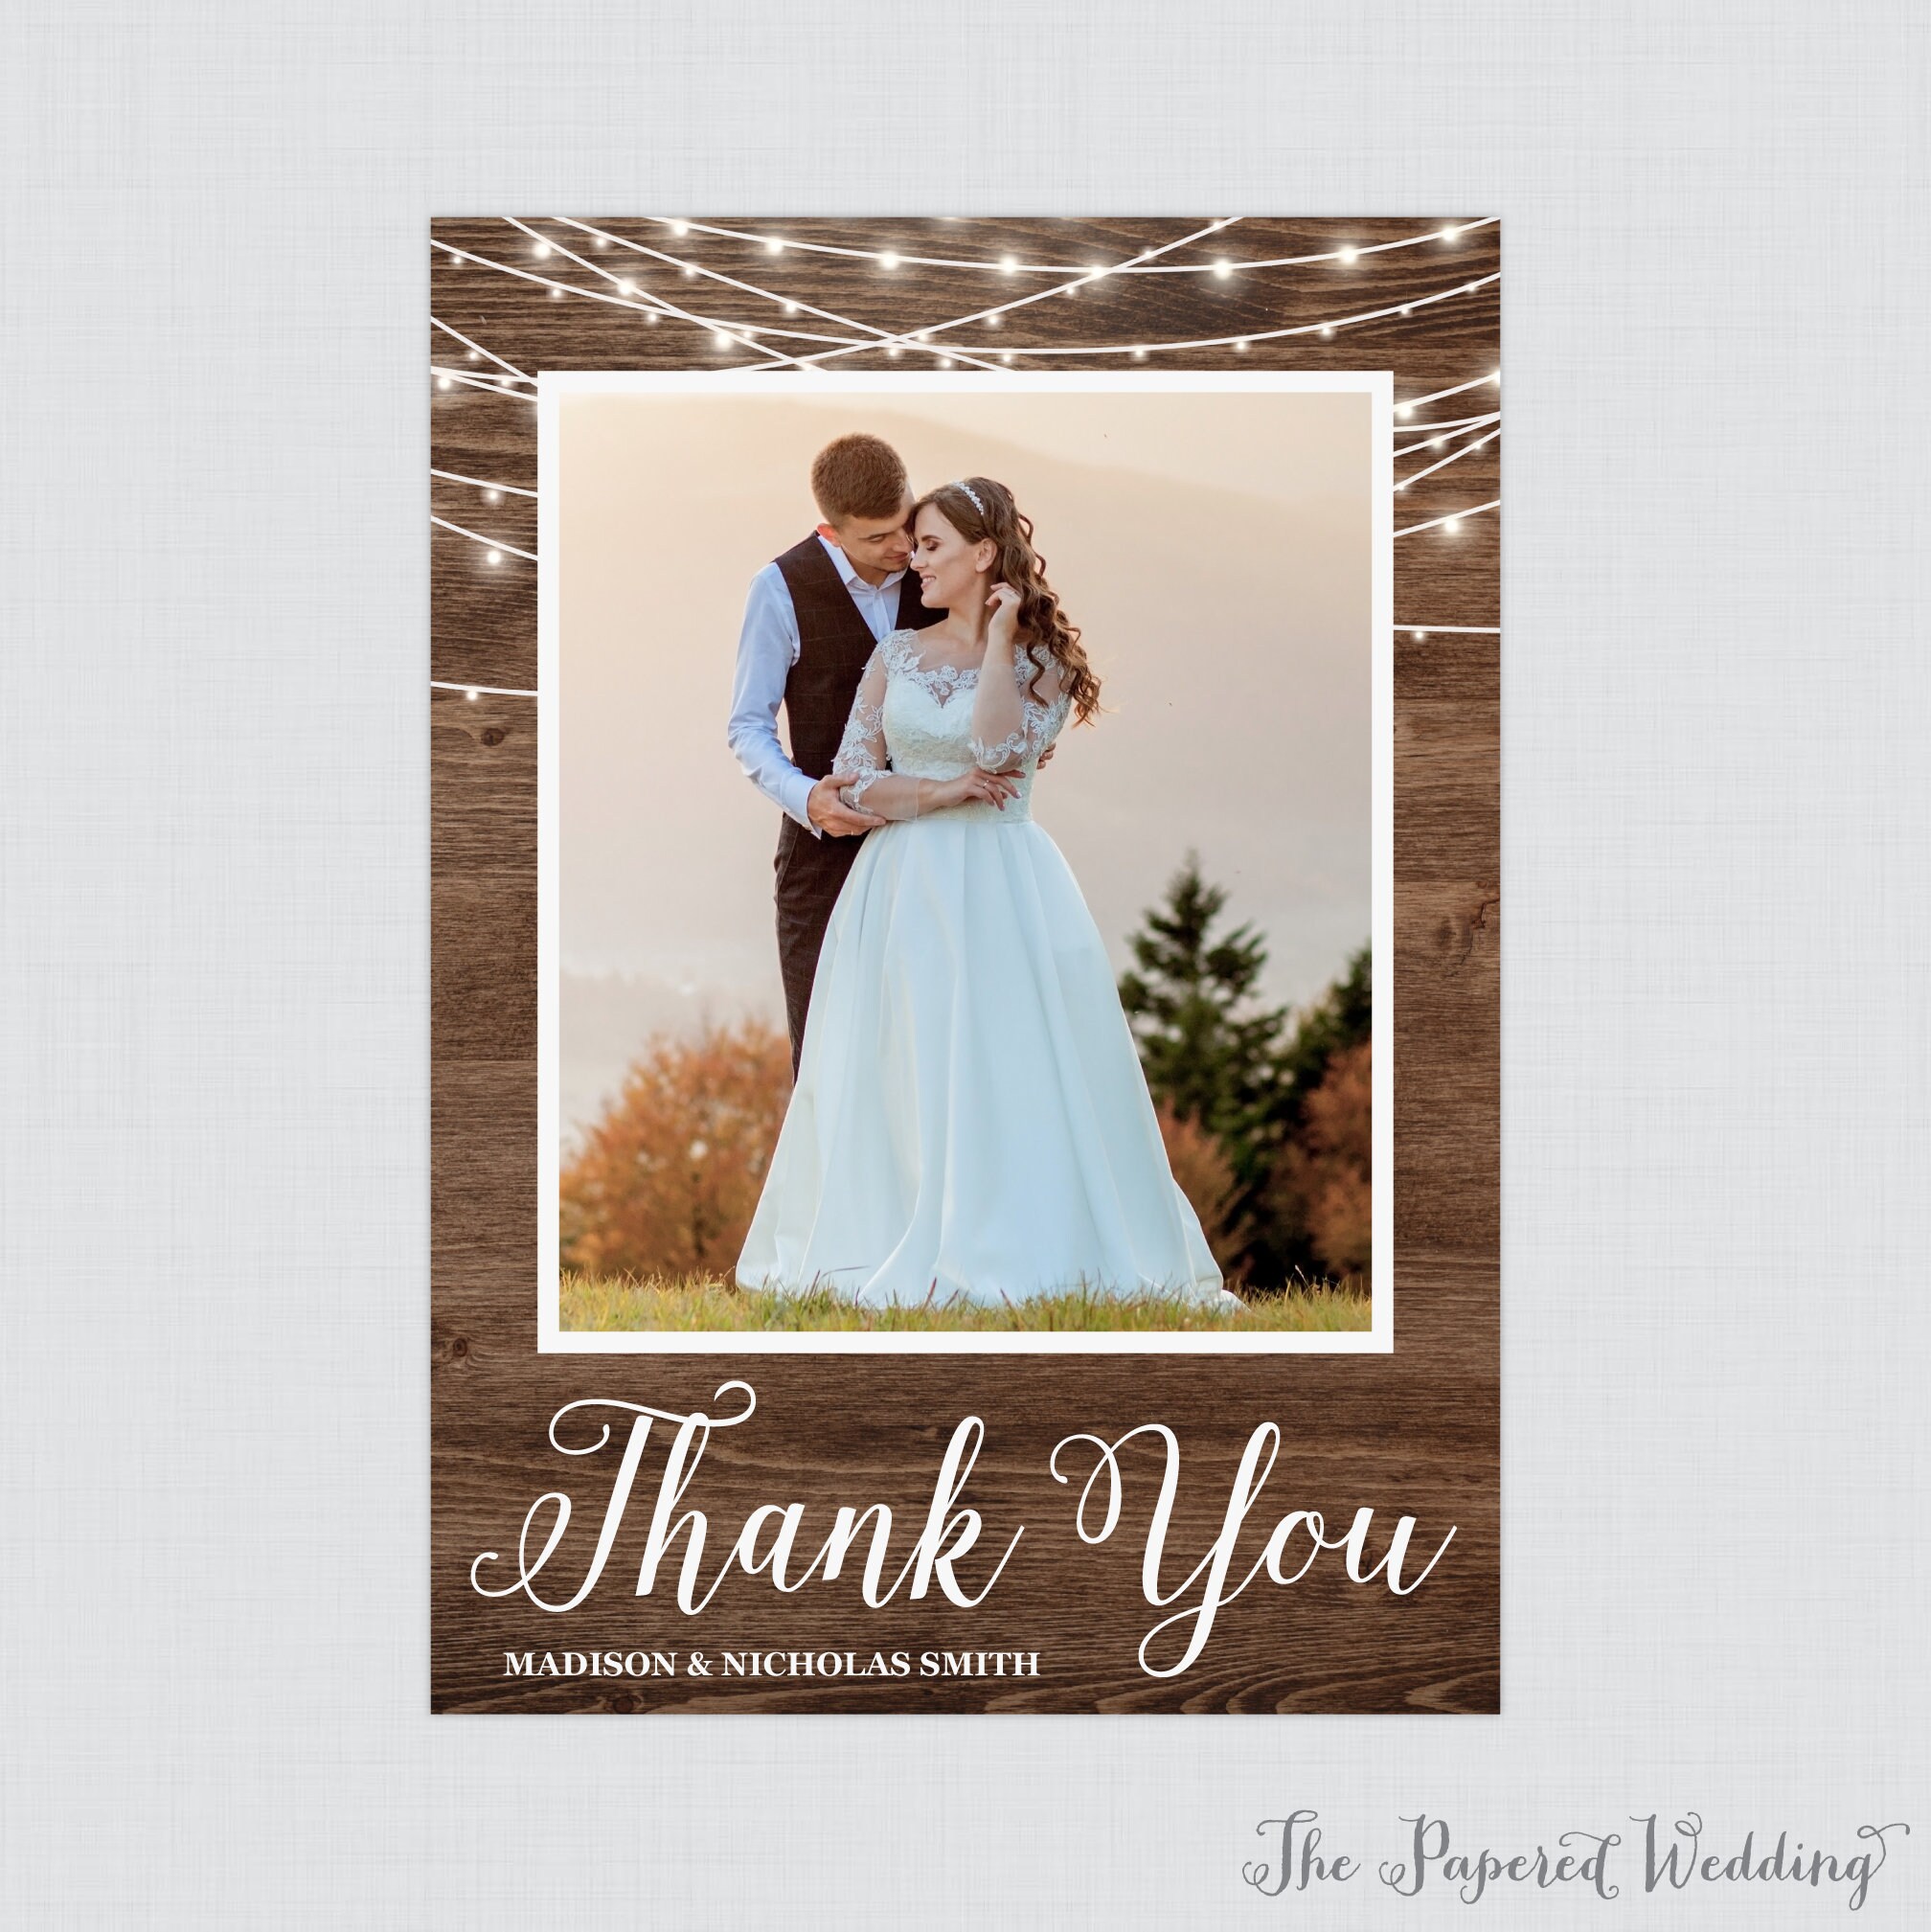 Printable Or Printed Rustic Photo Thank You Cards - Wood & String Lights With Picture, Personalized Country Barn Card 0036